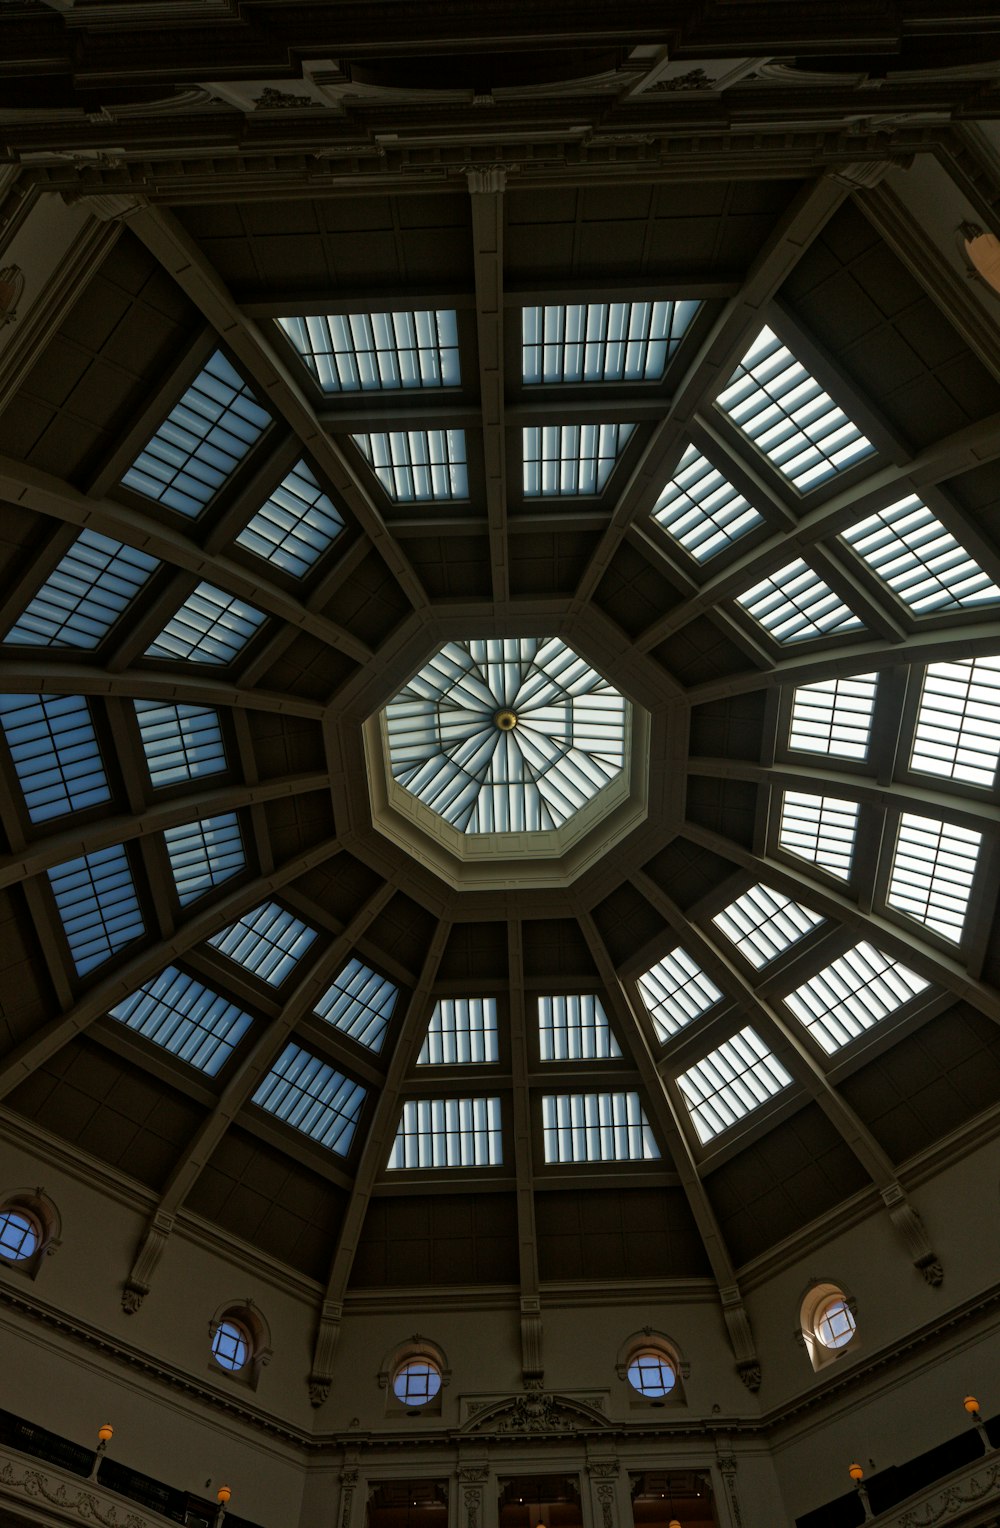 the ceiling of a large building with many windows